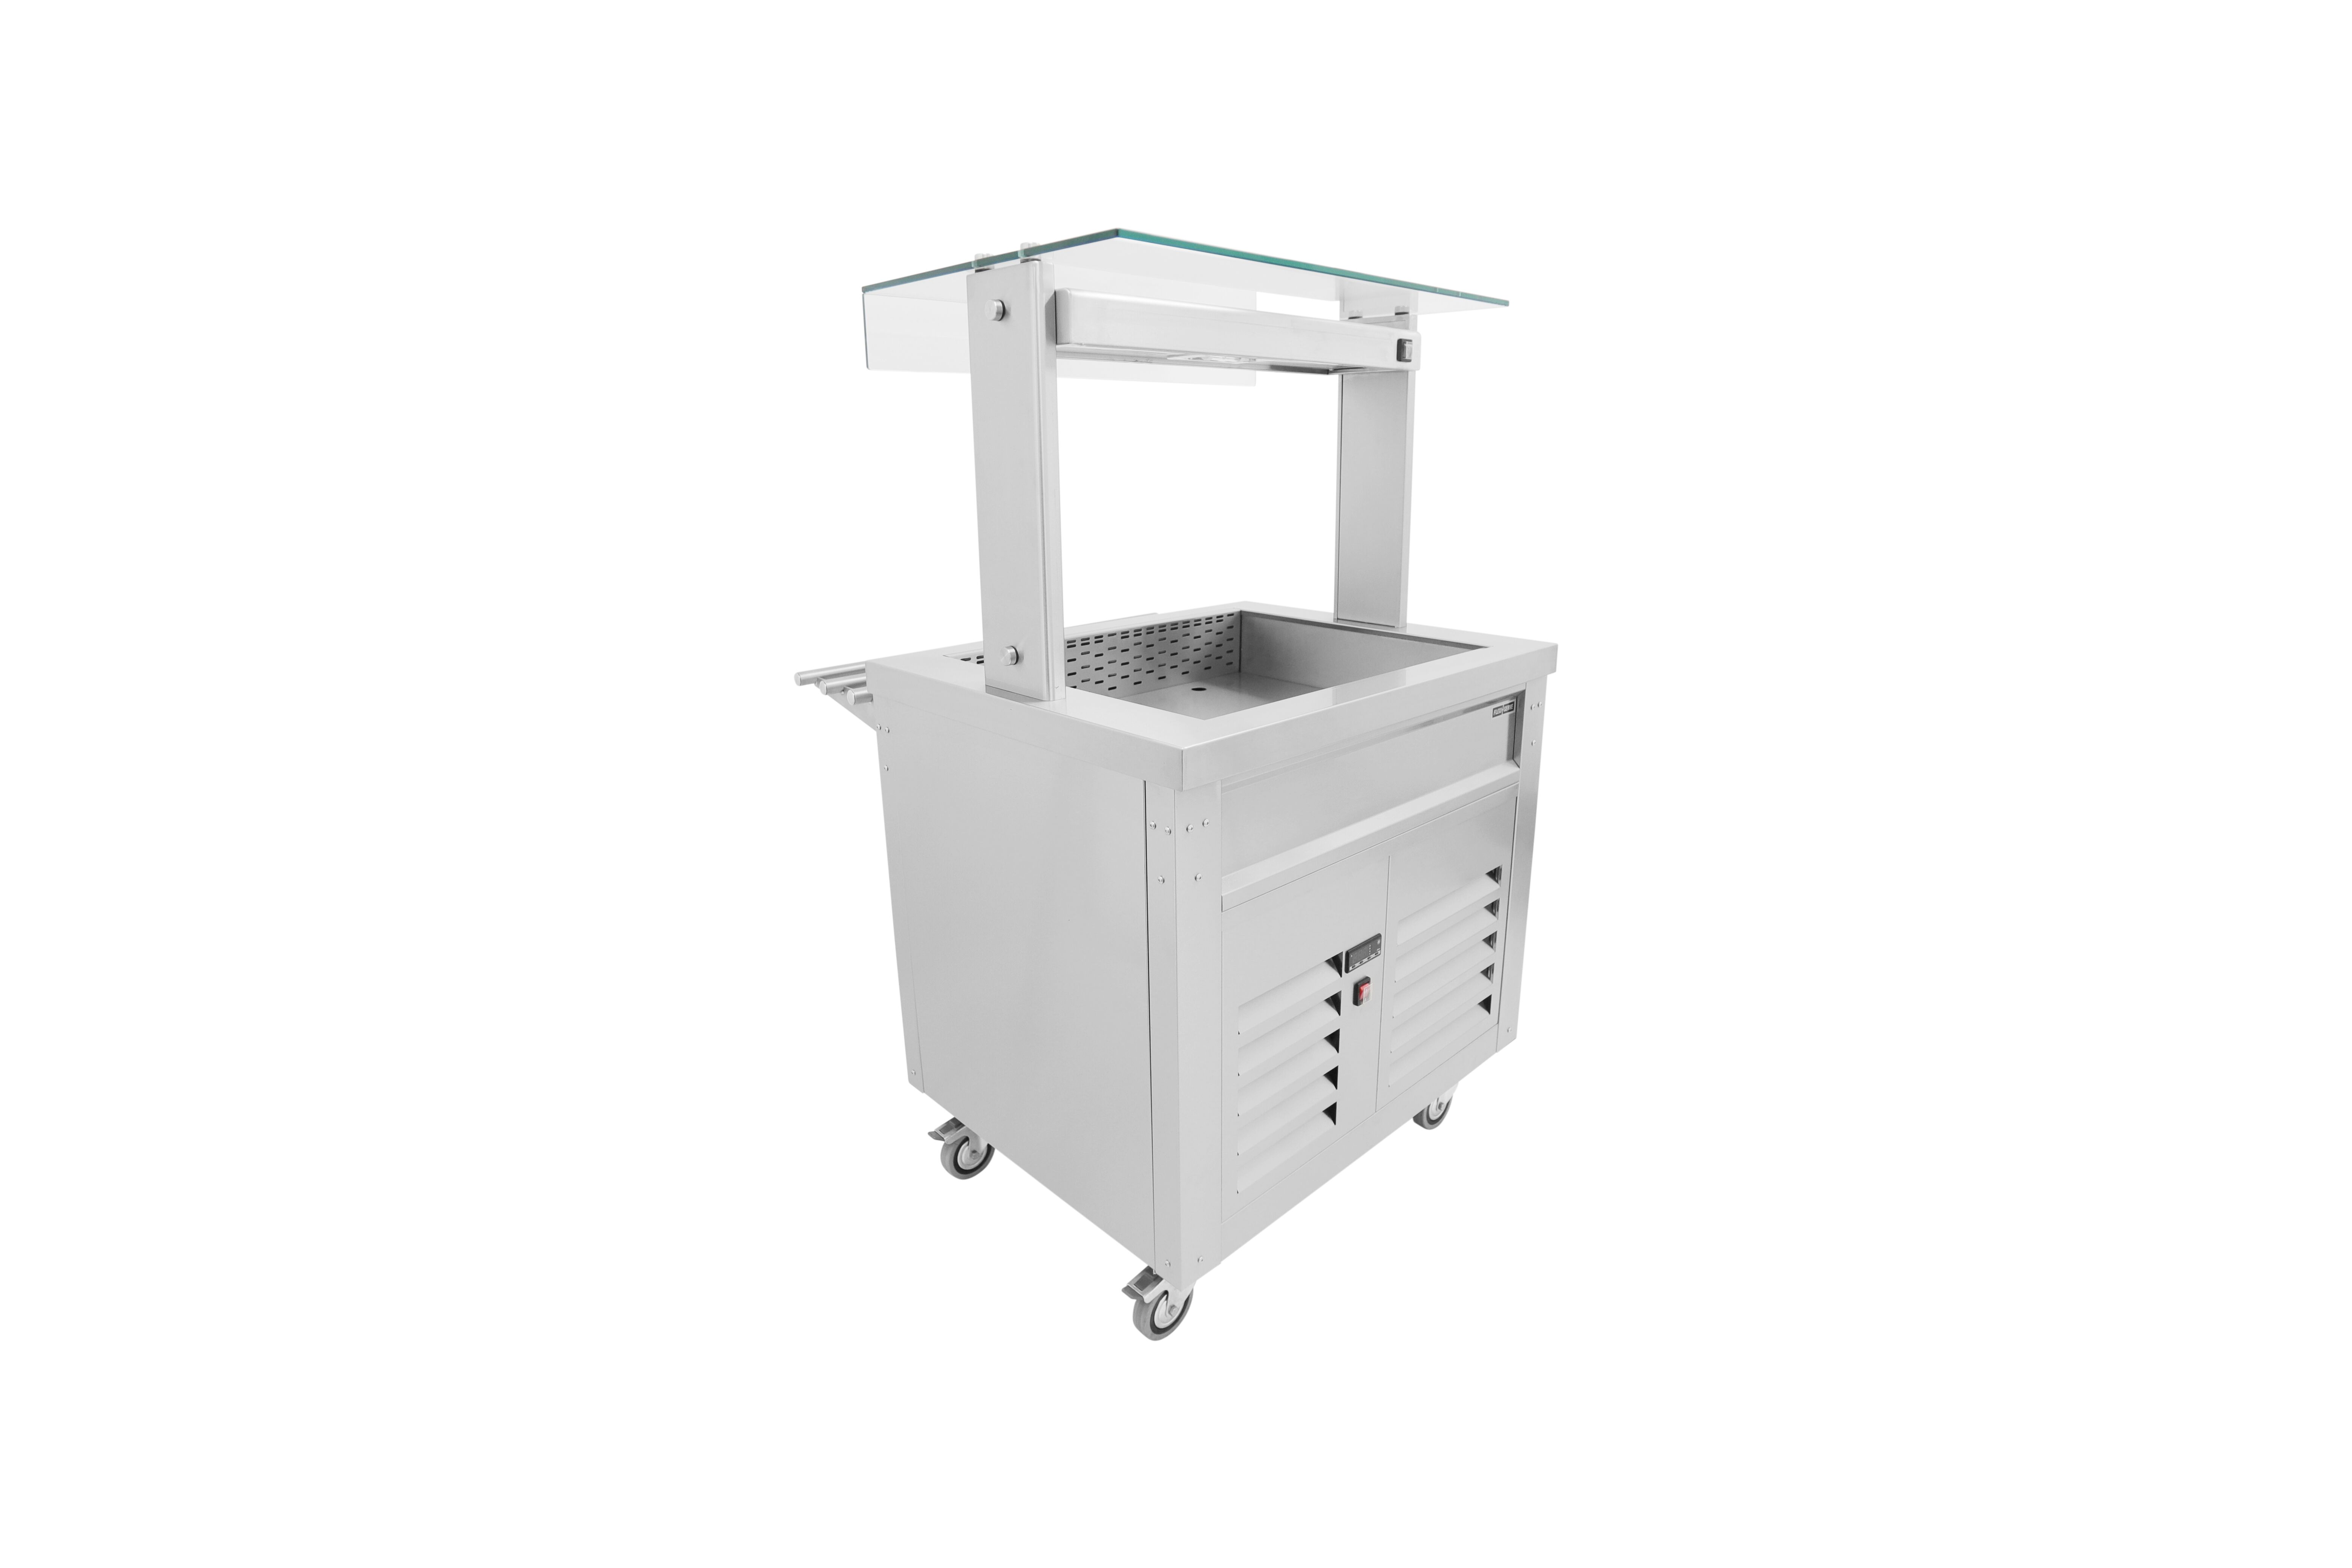 Parry FS-RW4 - Flexi Serve with Refrigerated Well and LED Illuminated Gantry